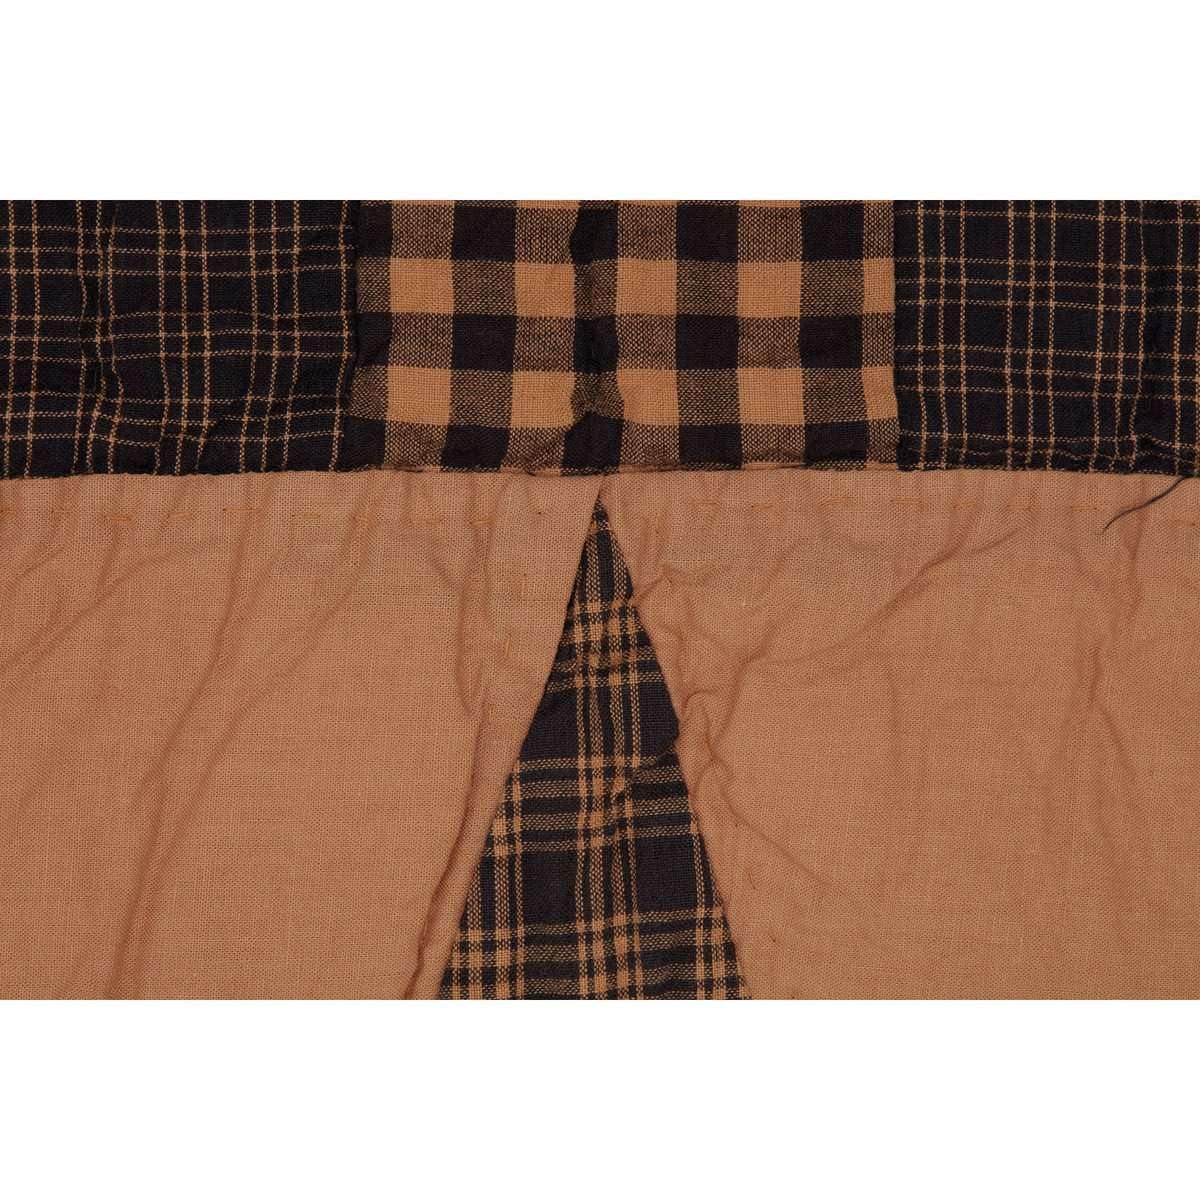 Teton Star Quilted Throw VHC Brands 